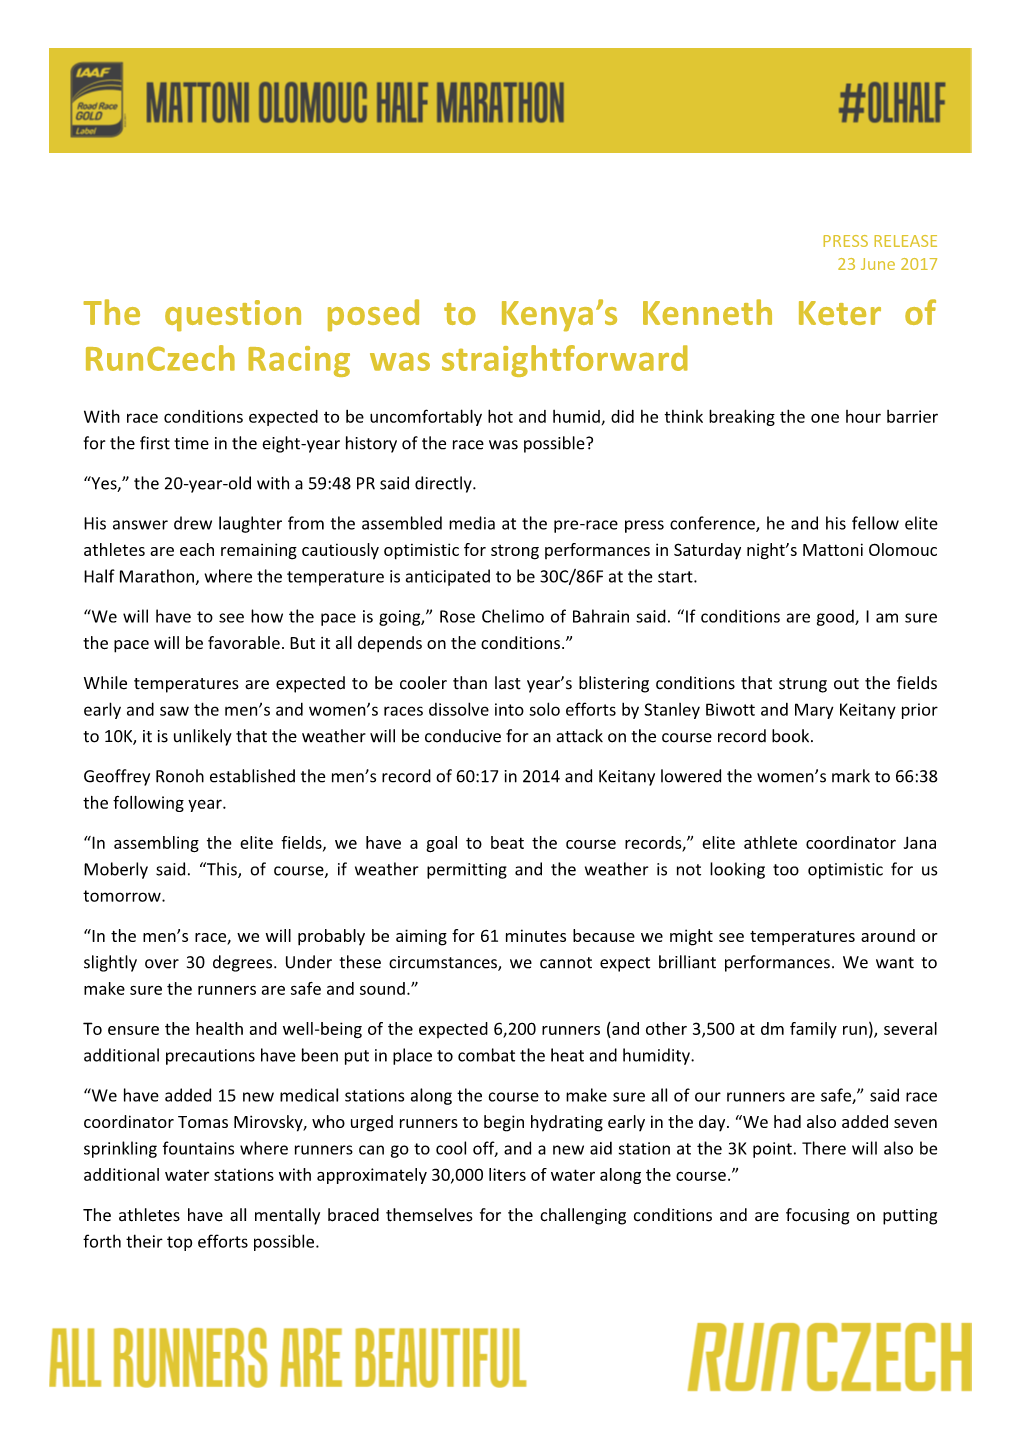 The Question Posed to Kenya's Kenneth Keter of Runczech Racing Was Straightforward